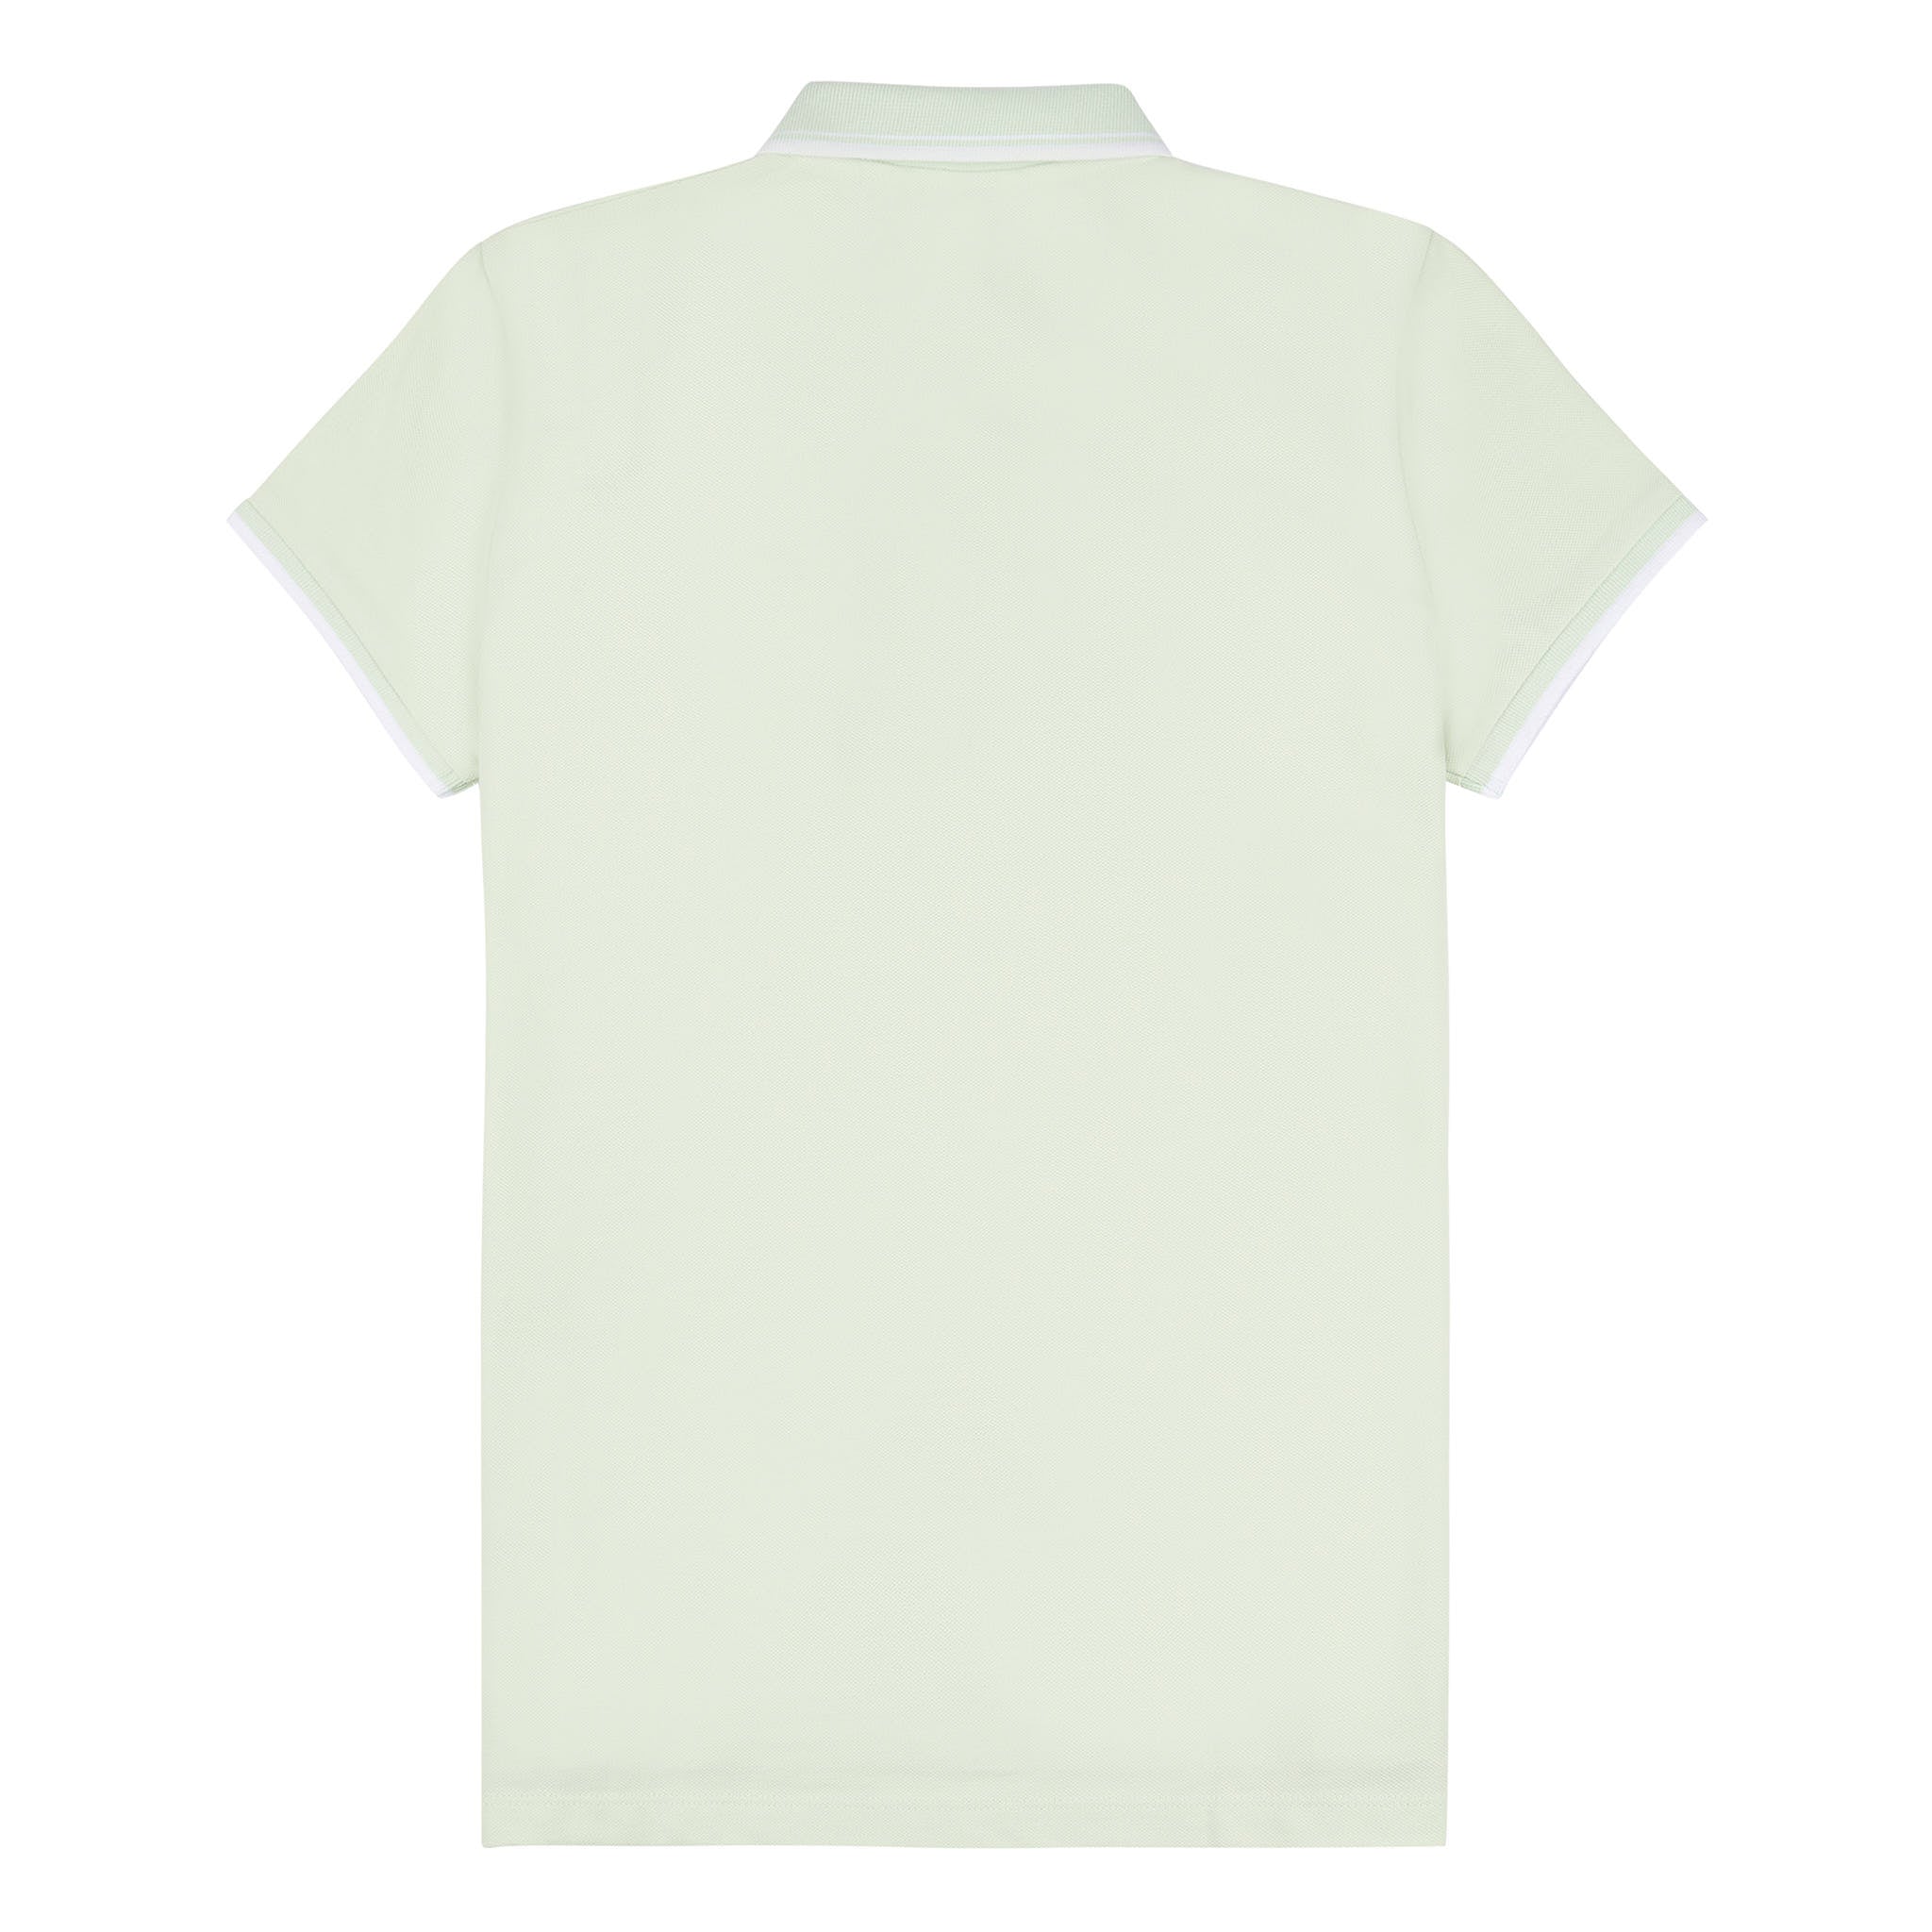 Womens Regular Fit Pique Polo Shirt in Ambrosia